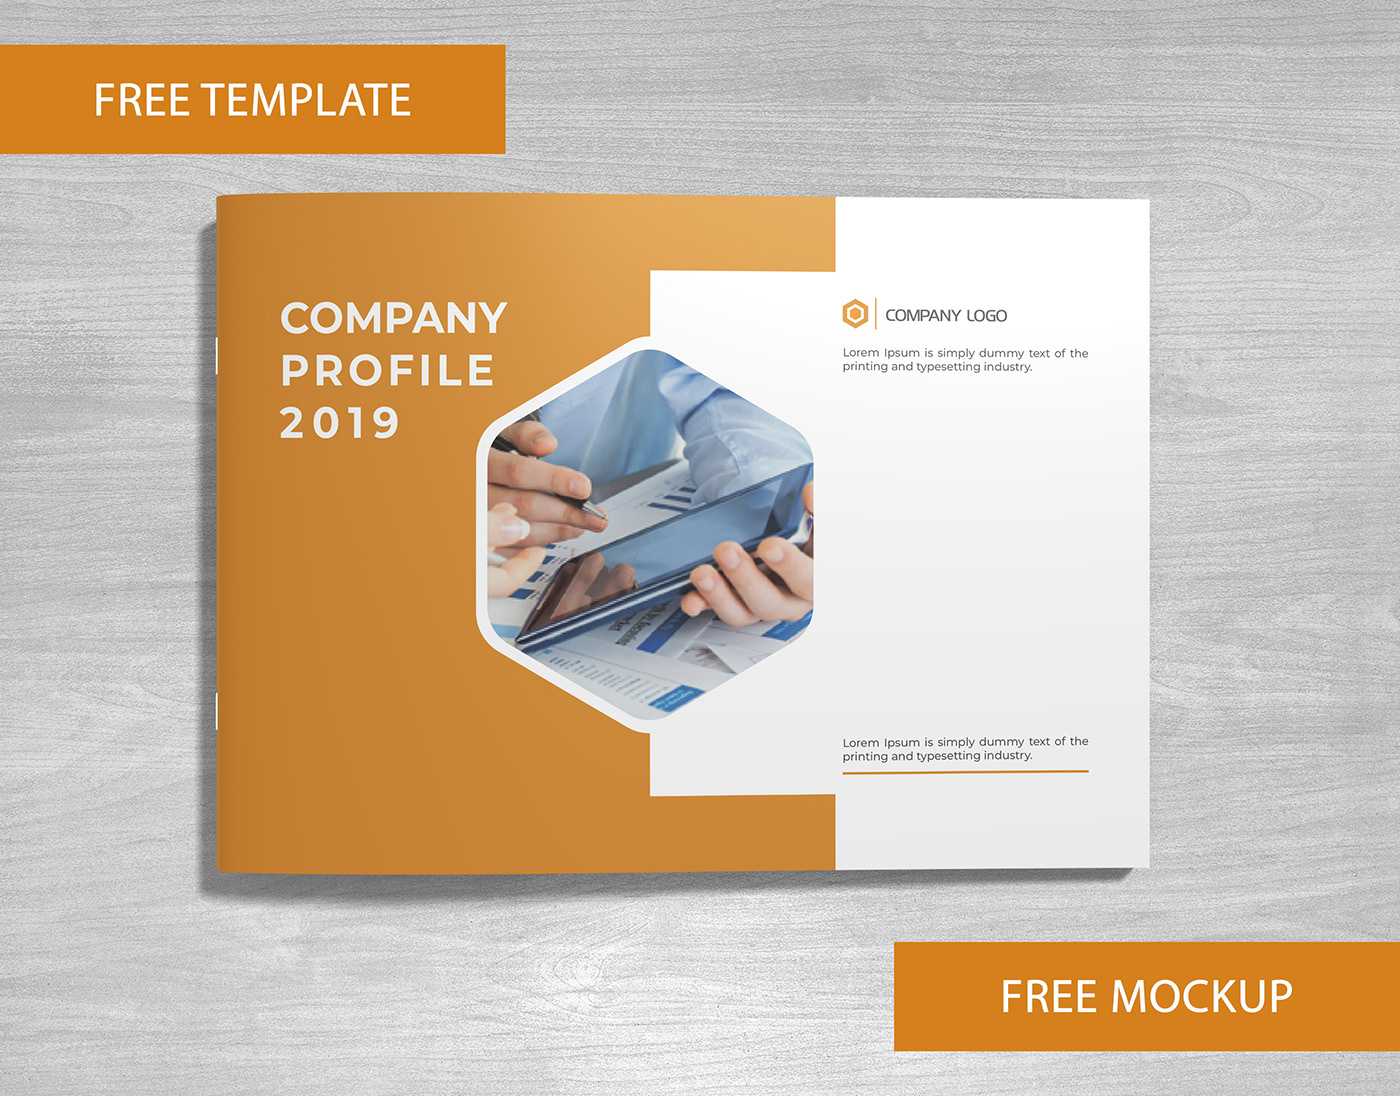 Company Profile Free Template And Mockup Download On Behance Within Free Brochure Template Downloads